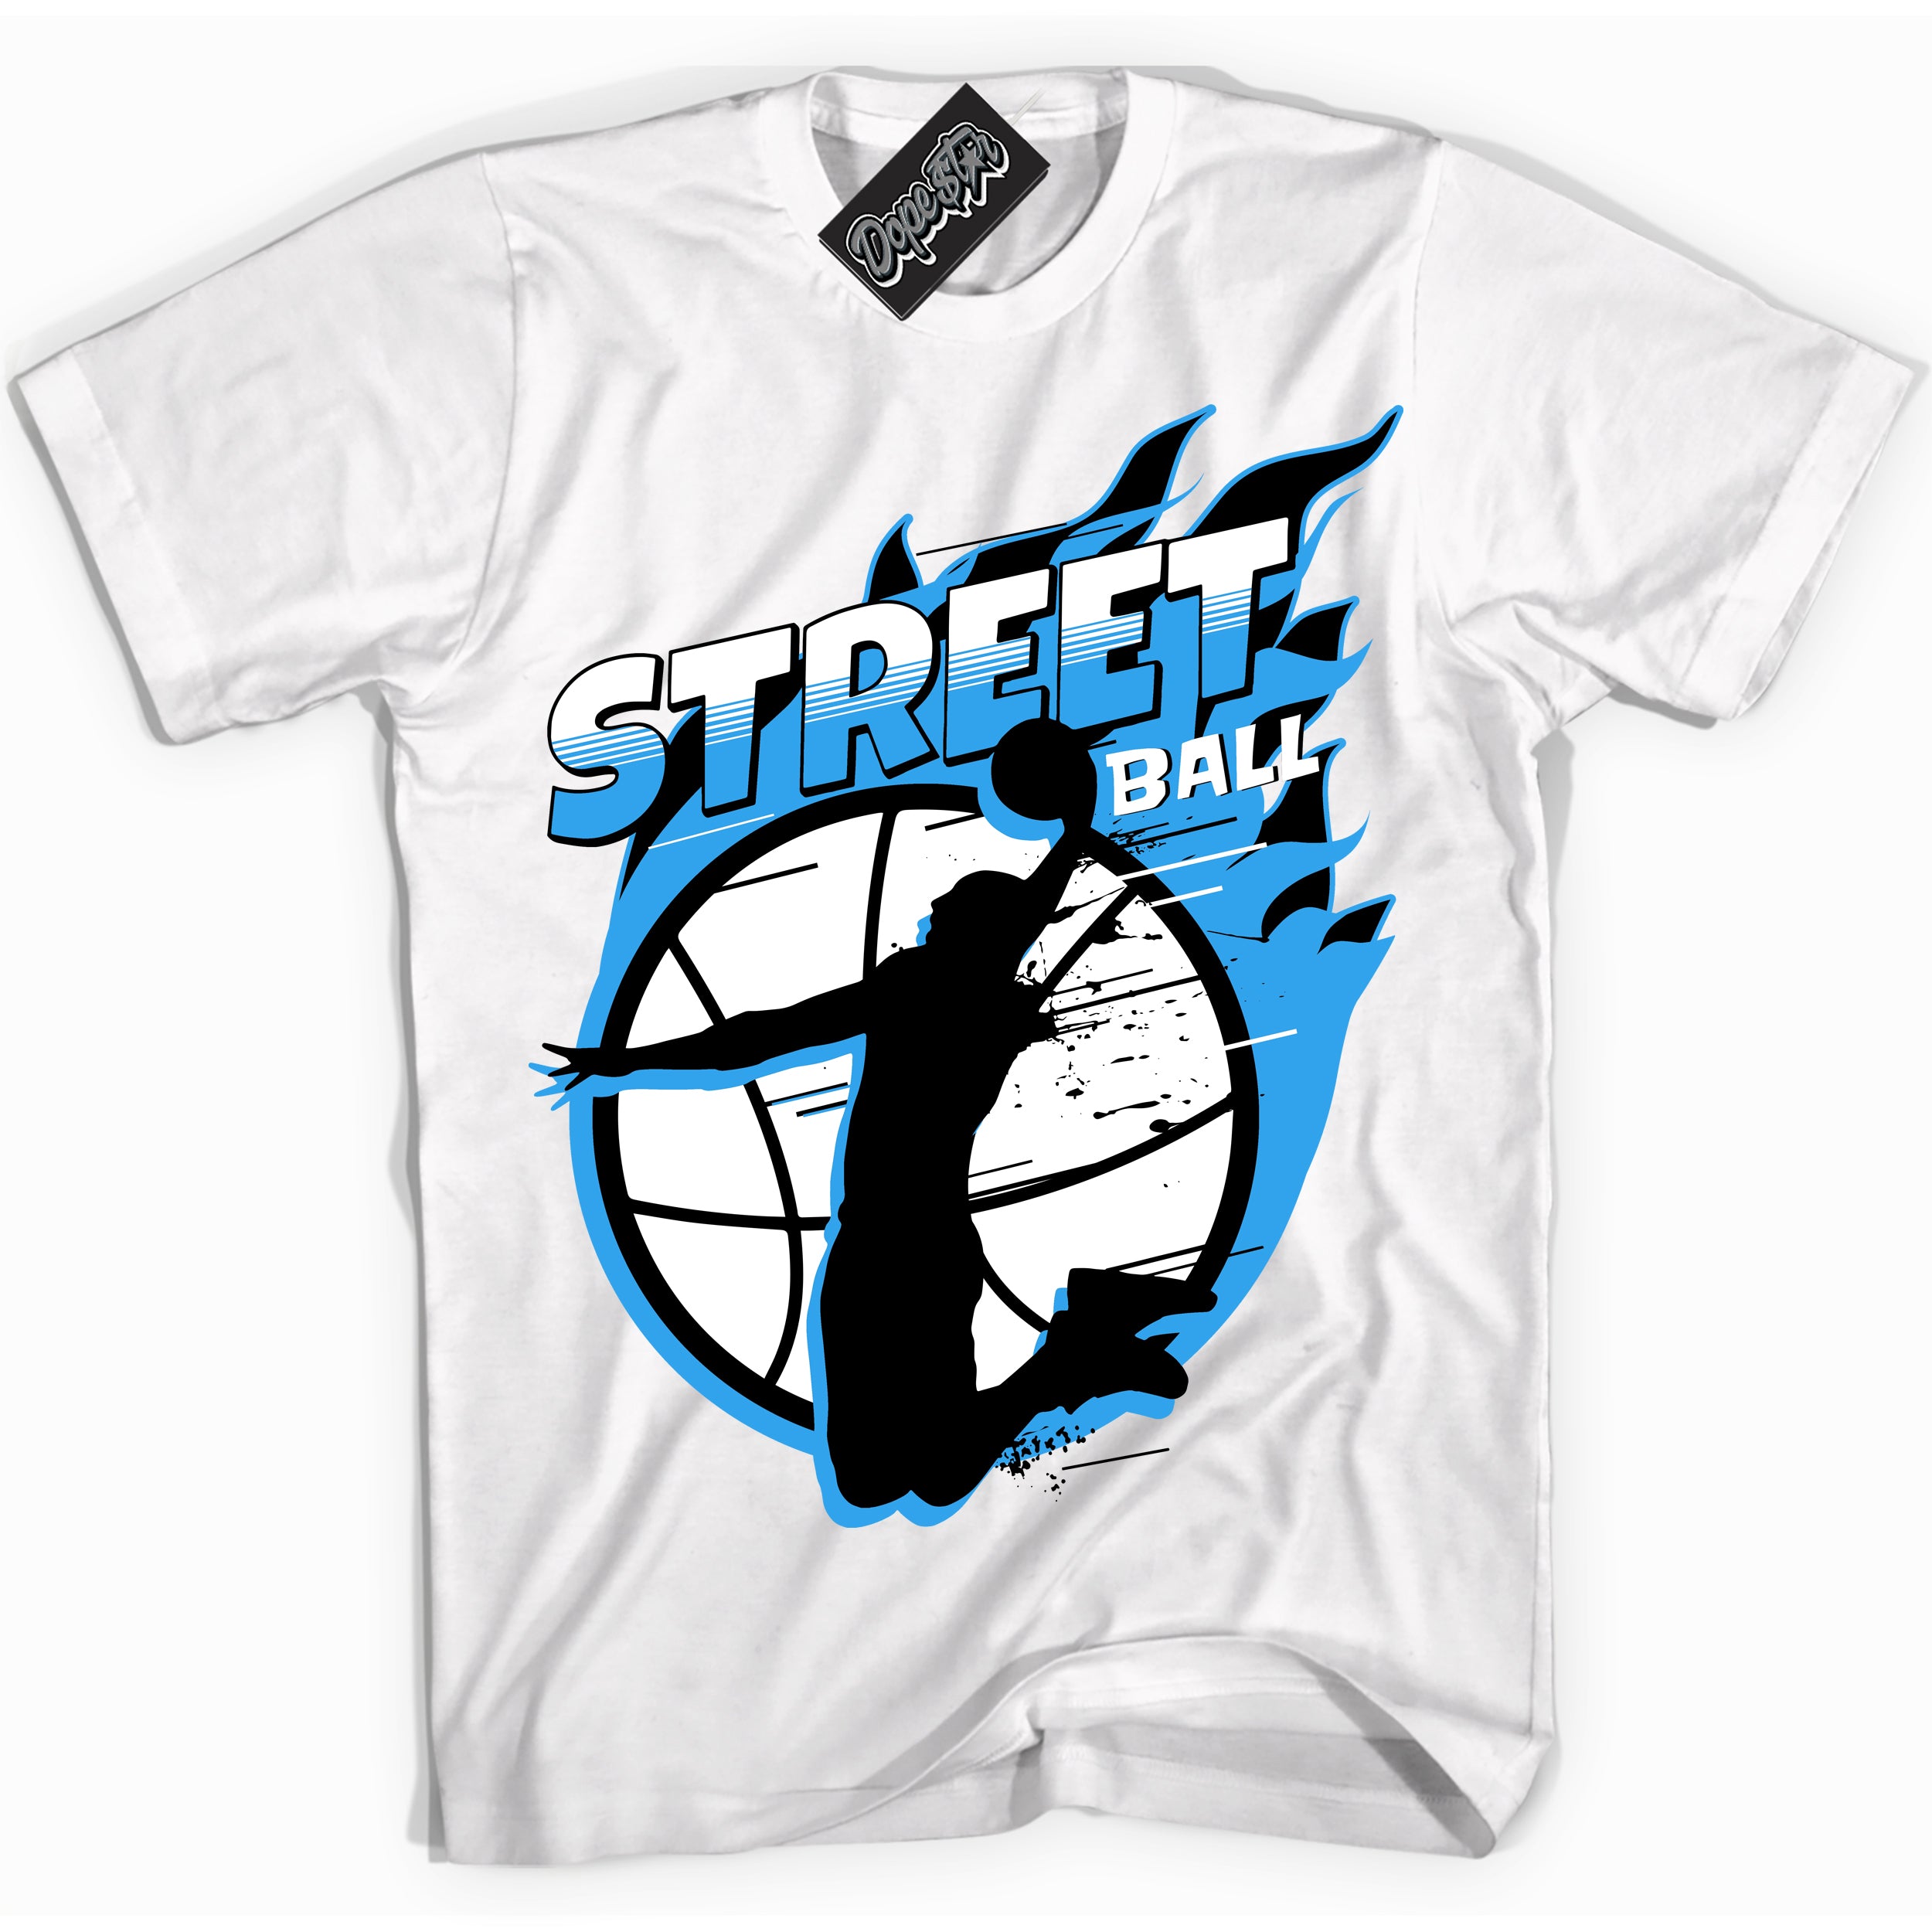 Cool White graphic tee with “ Street Ball ” design, that perfectly matches Powder Blue 9s sneakers 